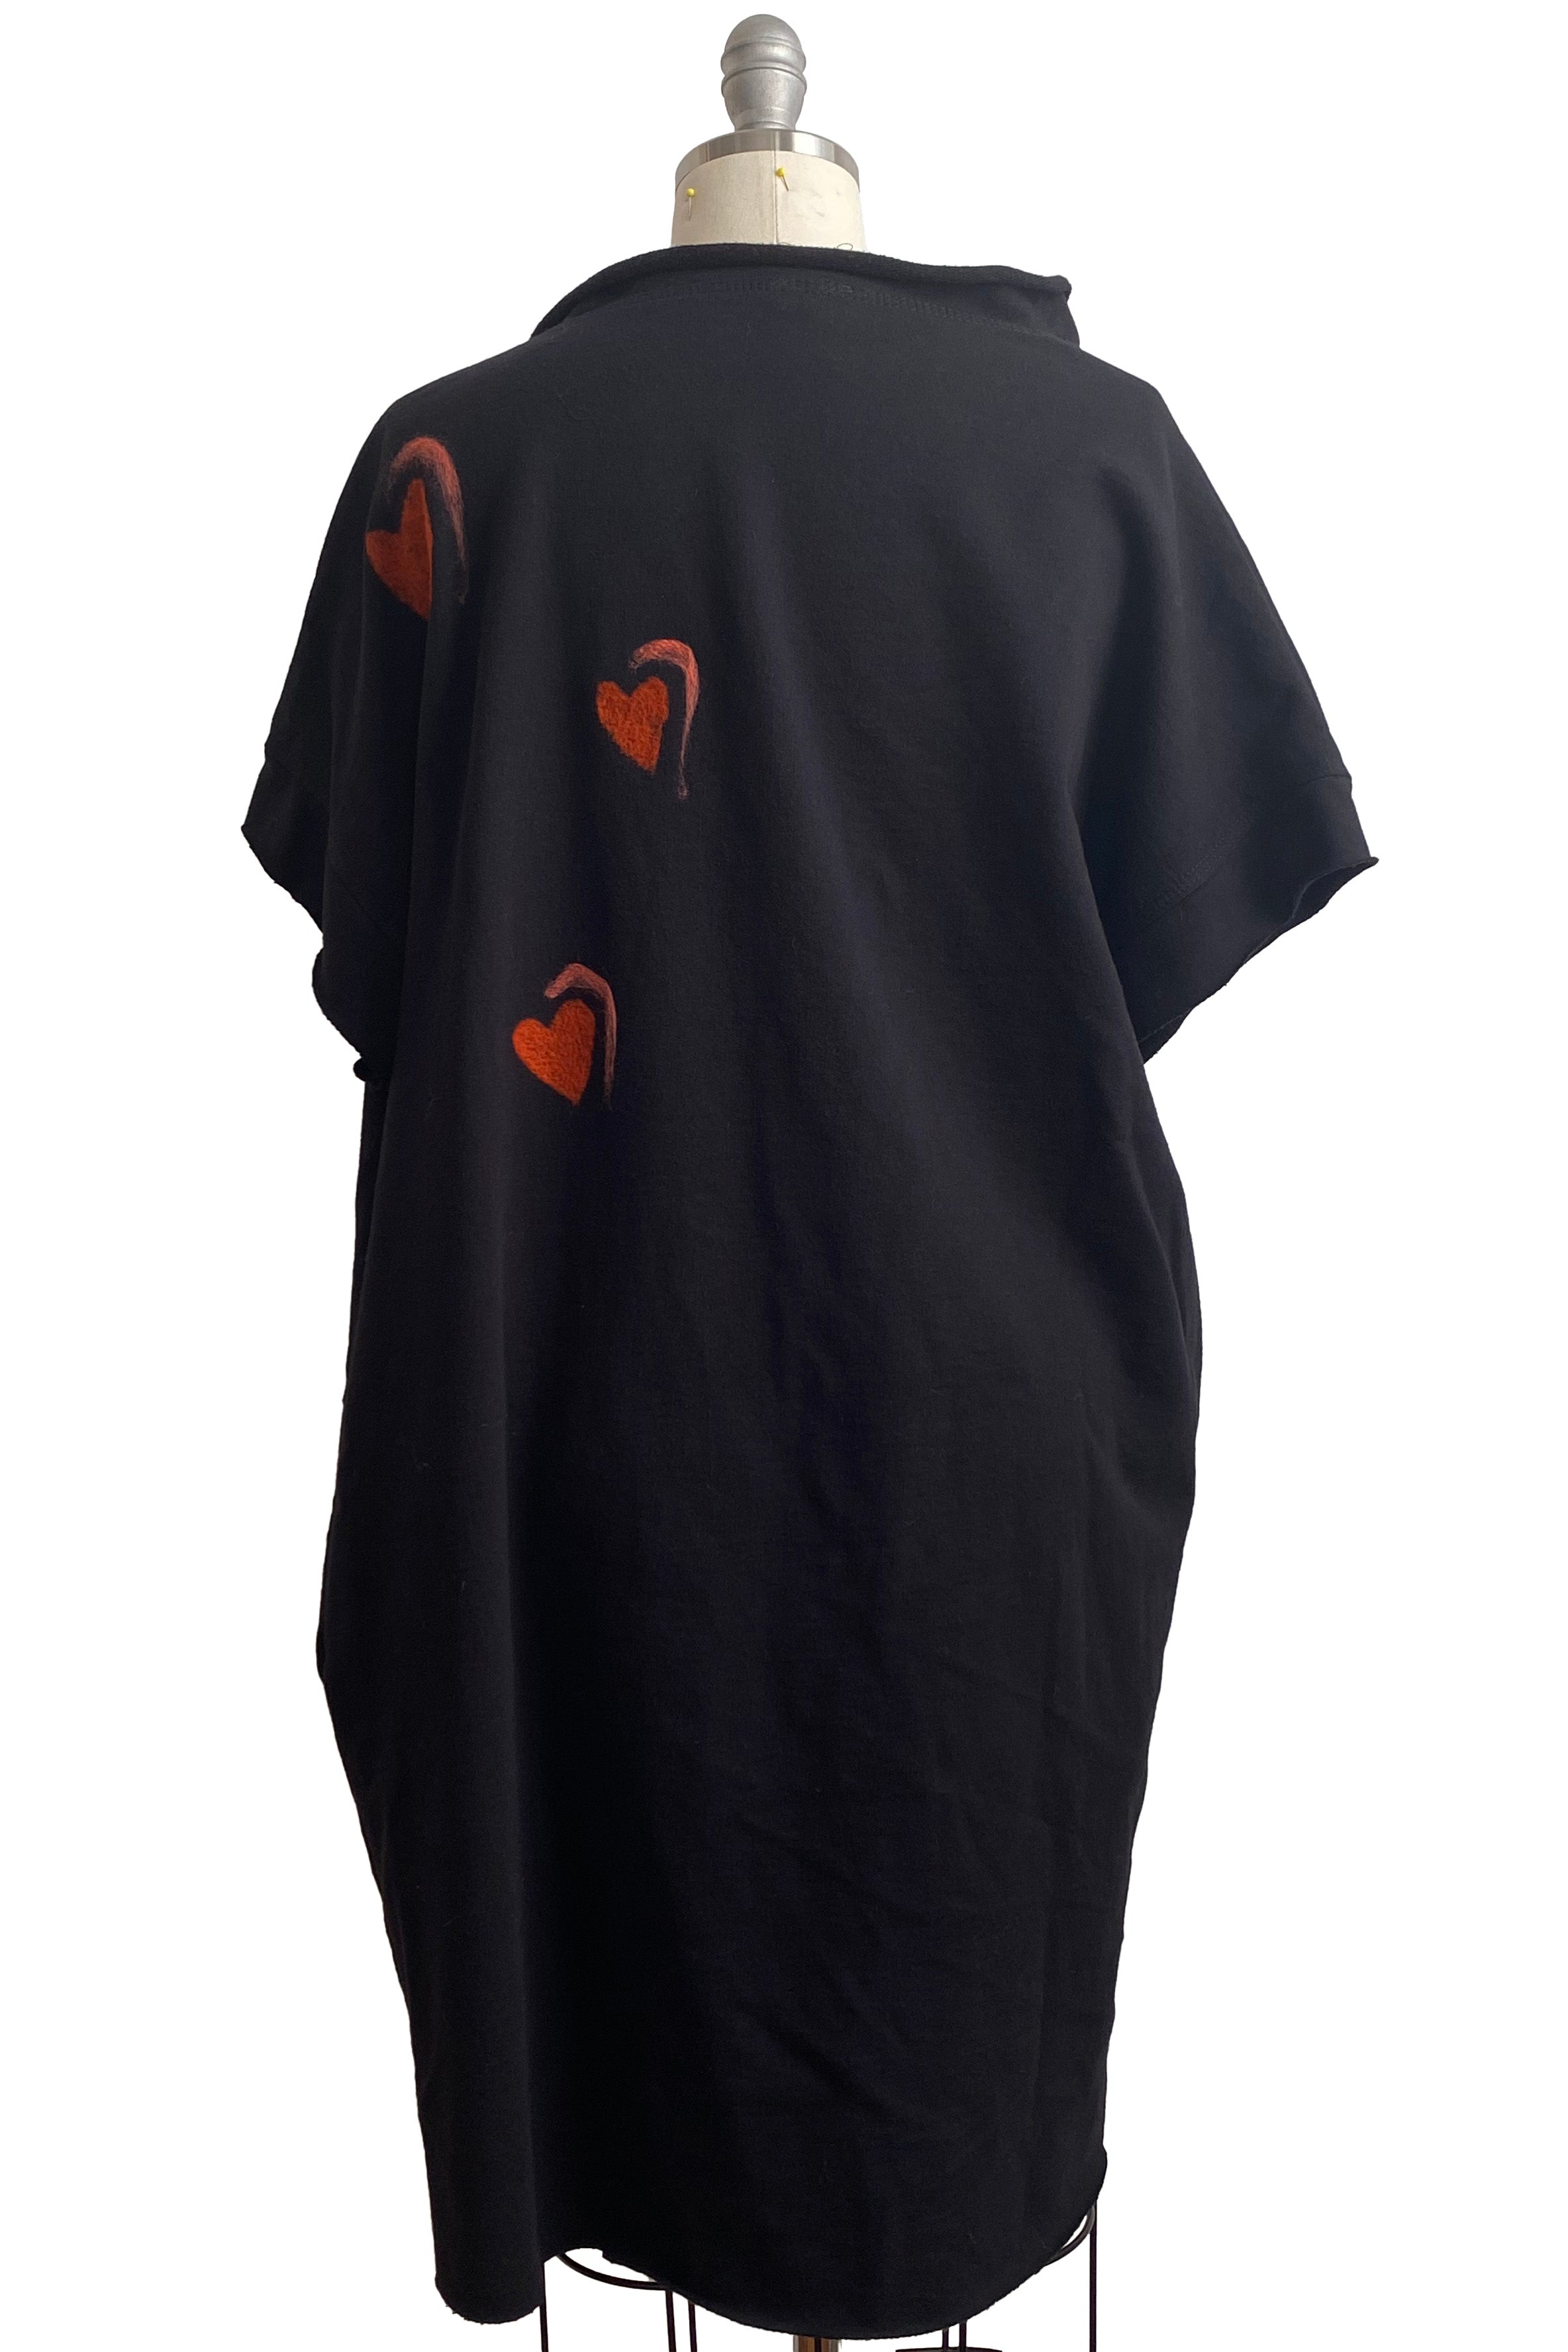 Petra Tunic Knit w/ Felted Hearts - Black, Pink, & Red - Large